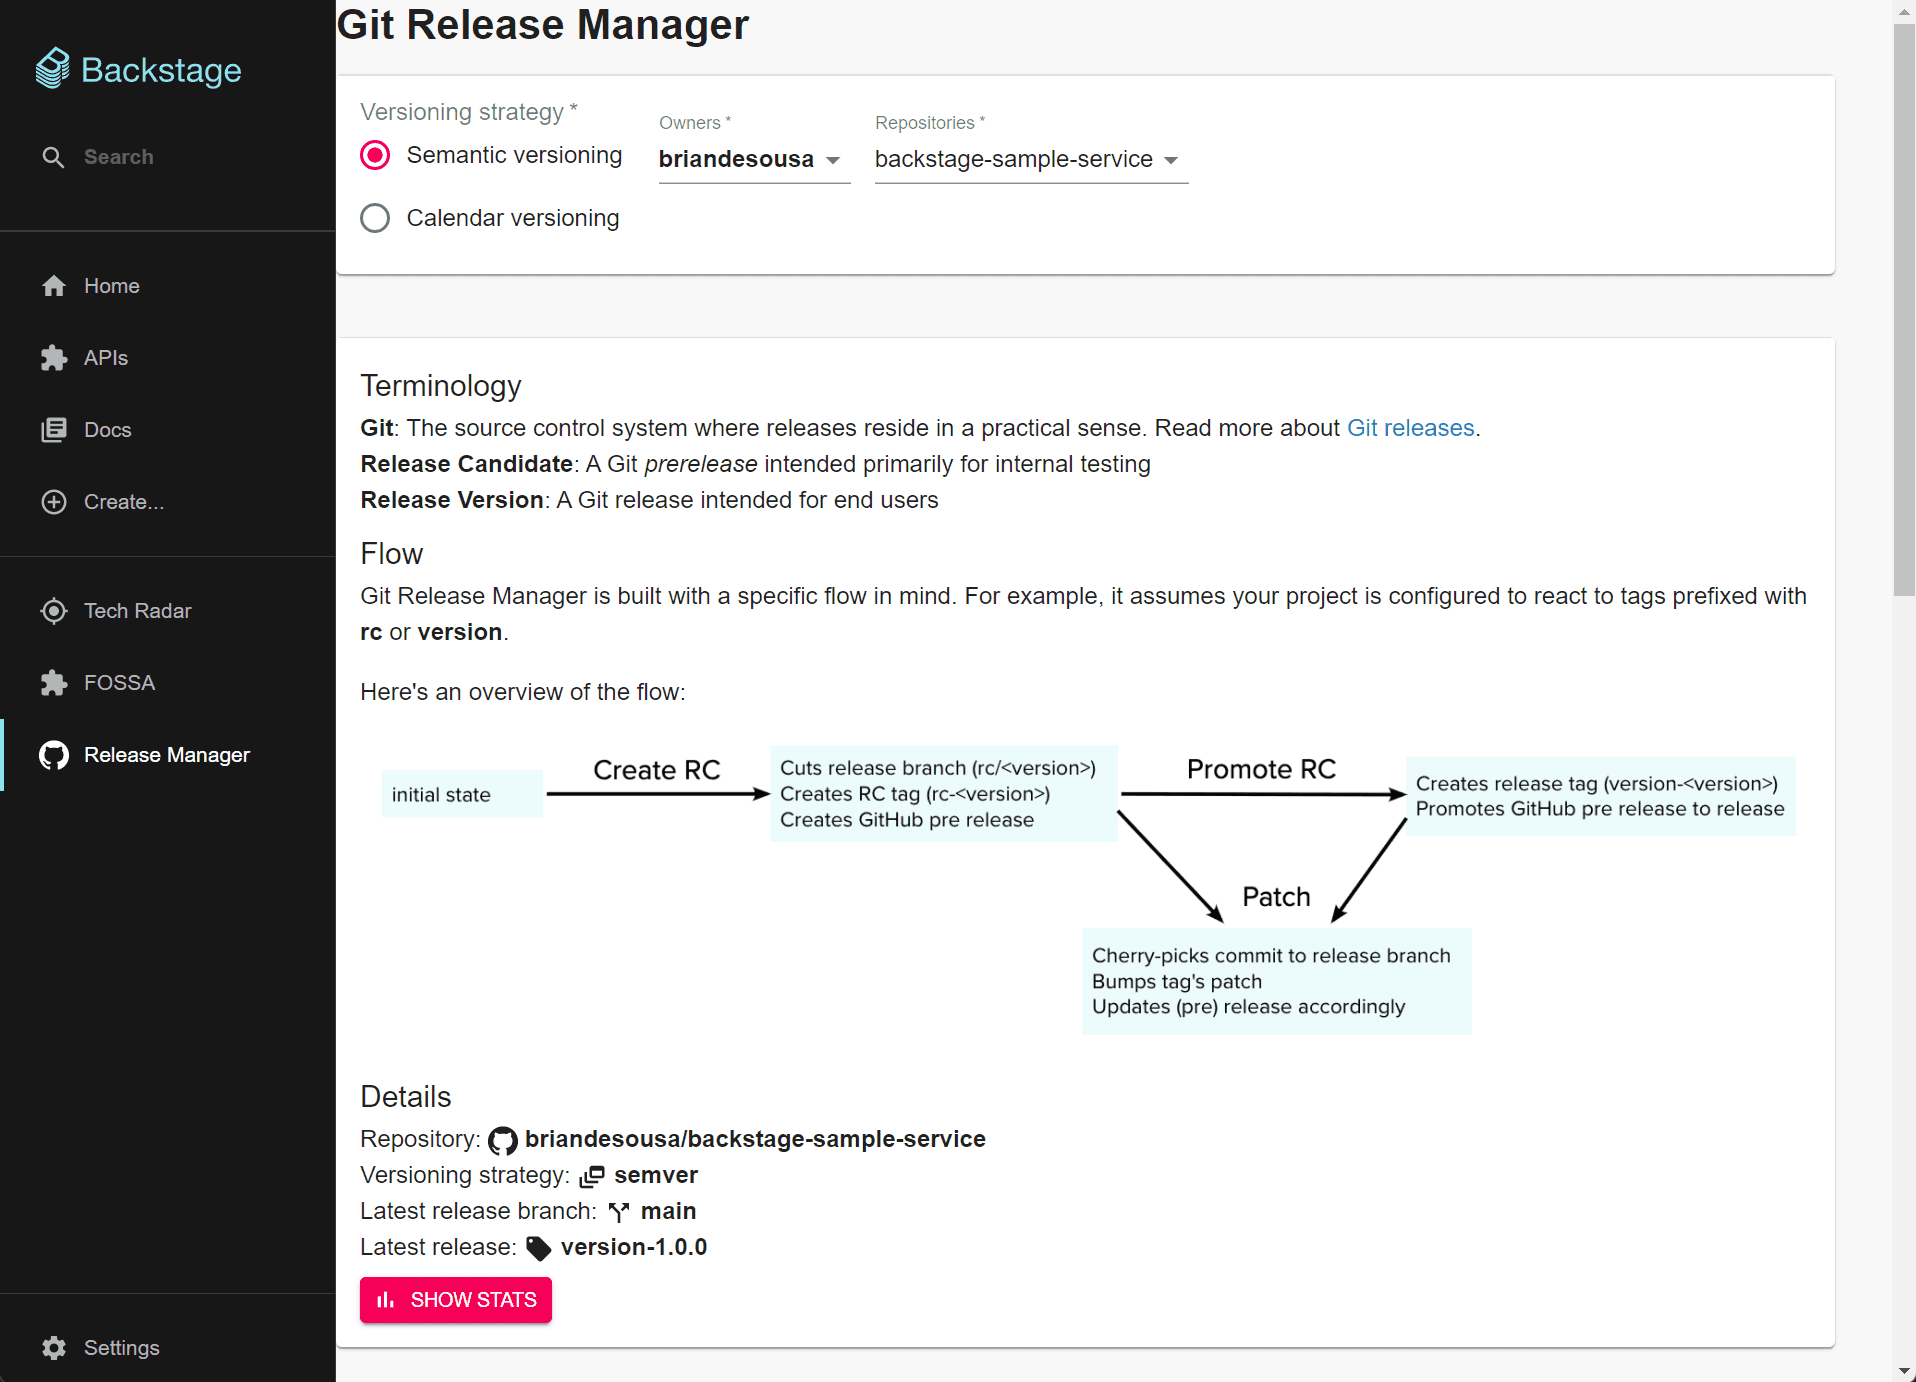 Git Release Manager in Backstage